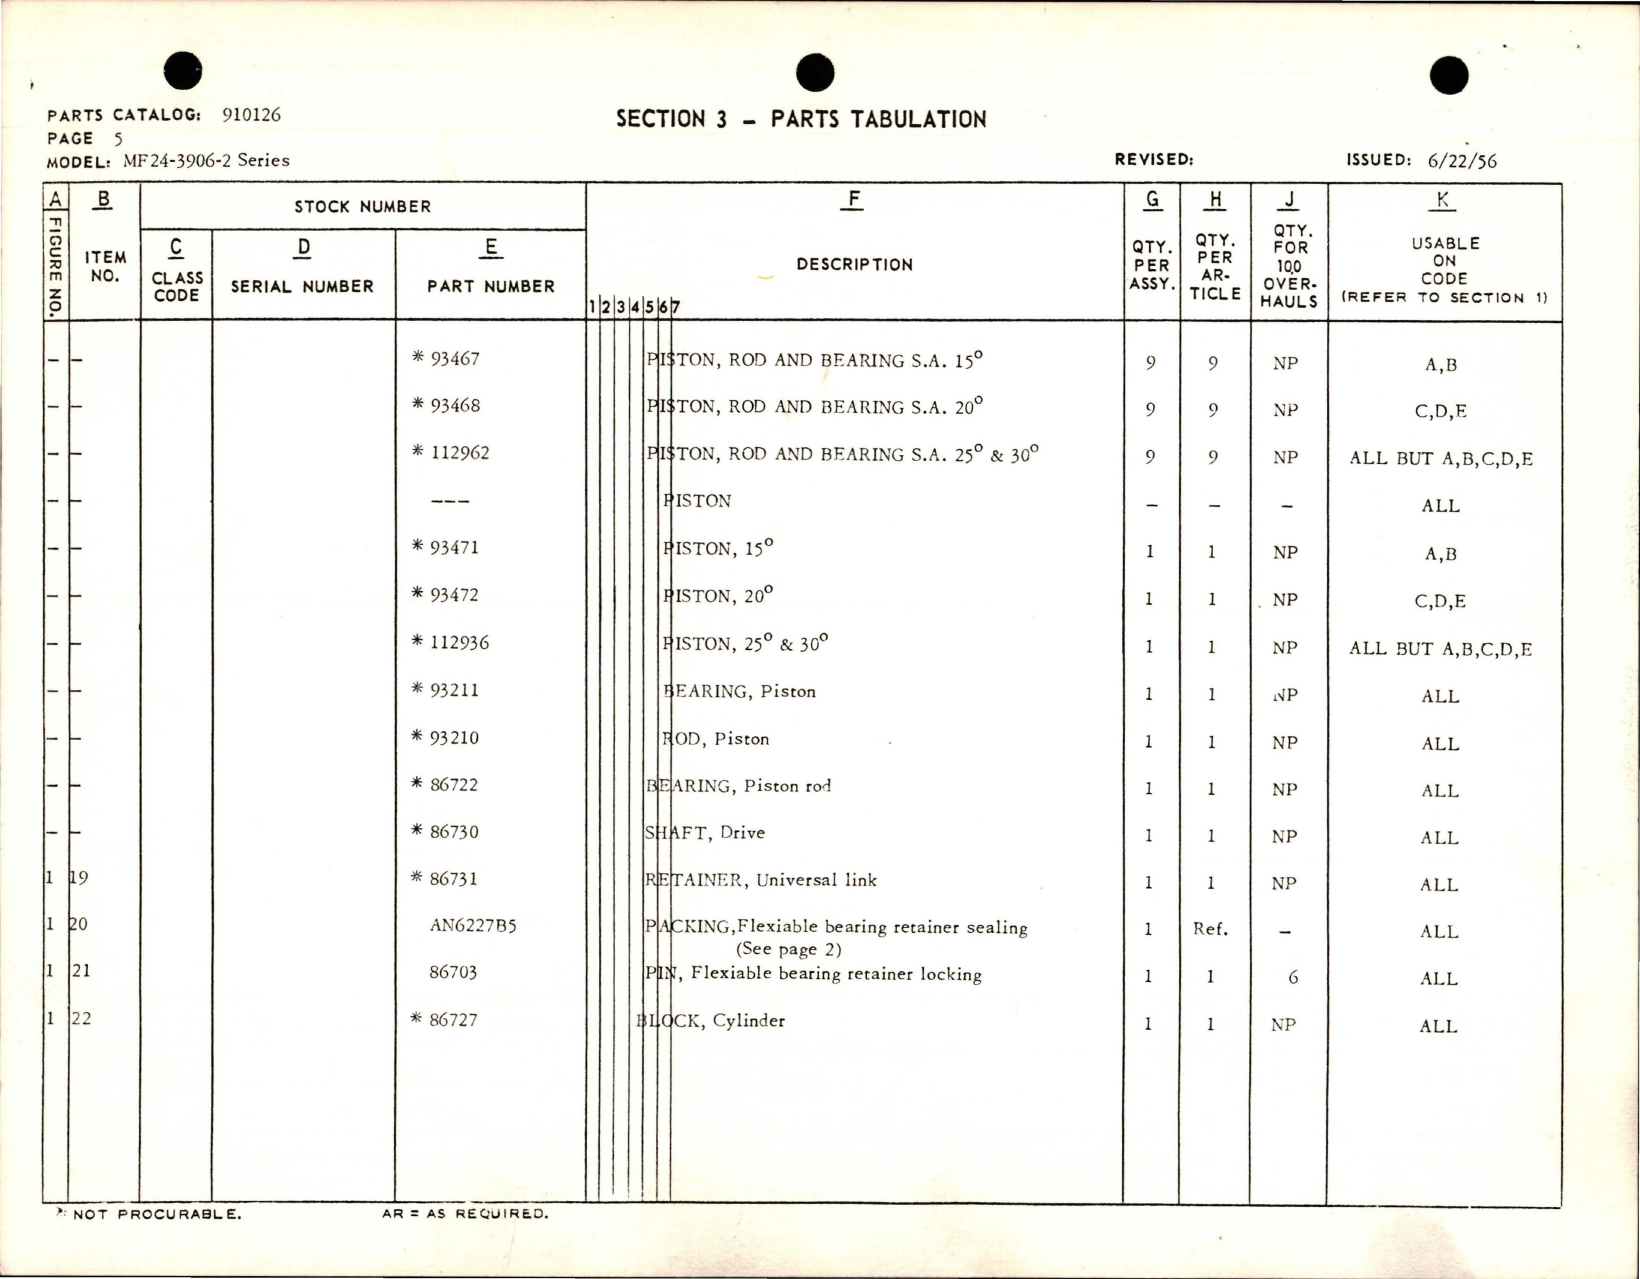 Sample page 7 from AirCorps Library document: Parts Catalog for Constant Displacement Motors - MF24-3906-2